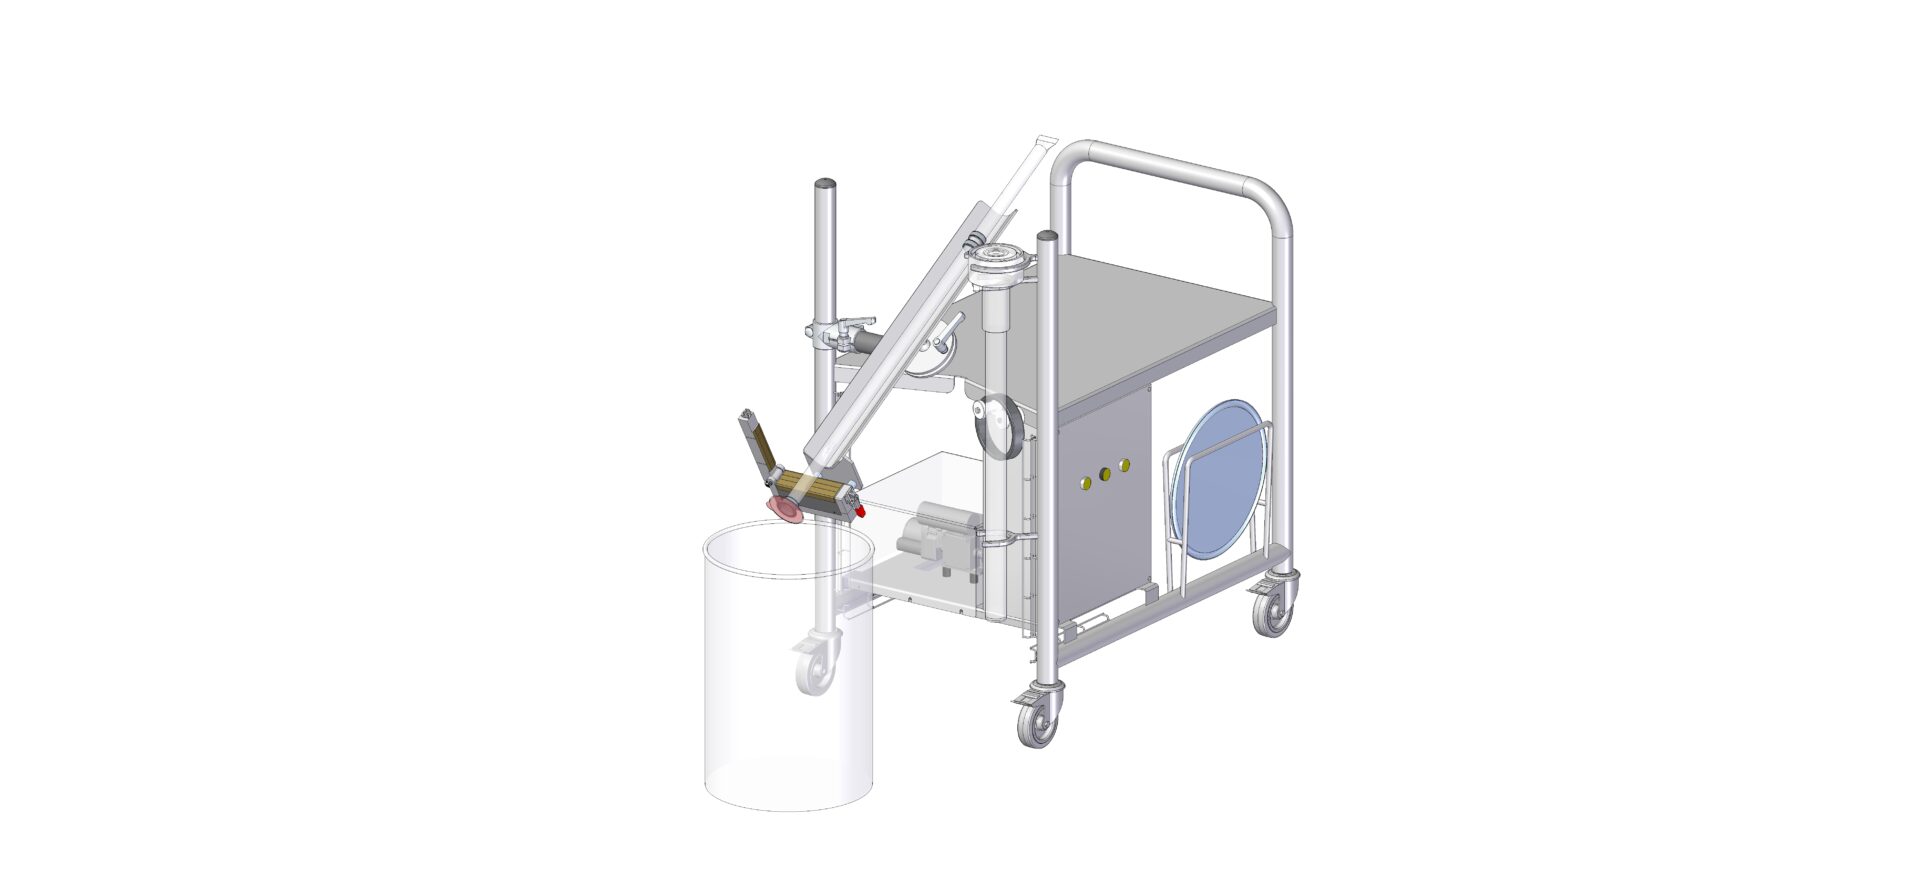 Illustration of a HECHT CPS Containment Sampling Stick Test Trolley, a mobile testing unit equipped with a sampling stick showcasing a sturdy metal frame on wheels for easy manoeuvrability, designed for secure and efficient sample collection in a laboratory or industrial setting.